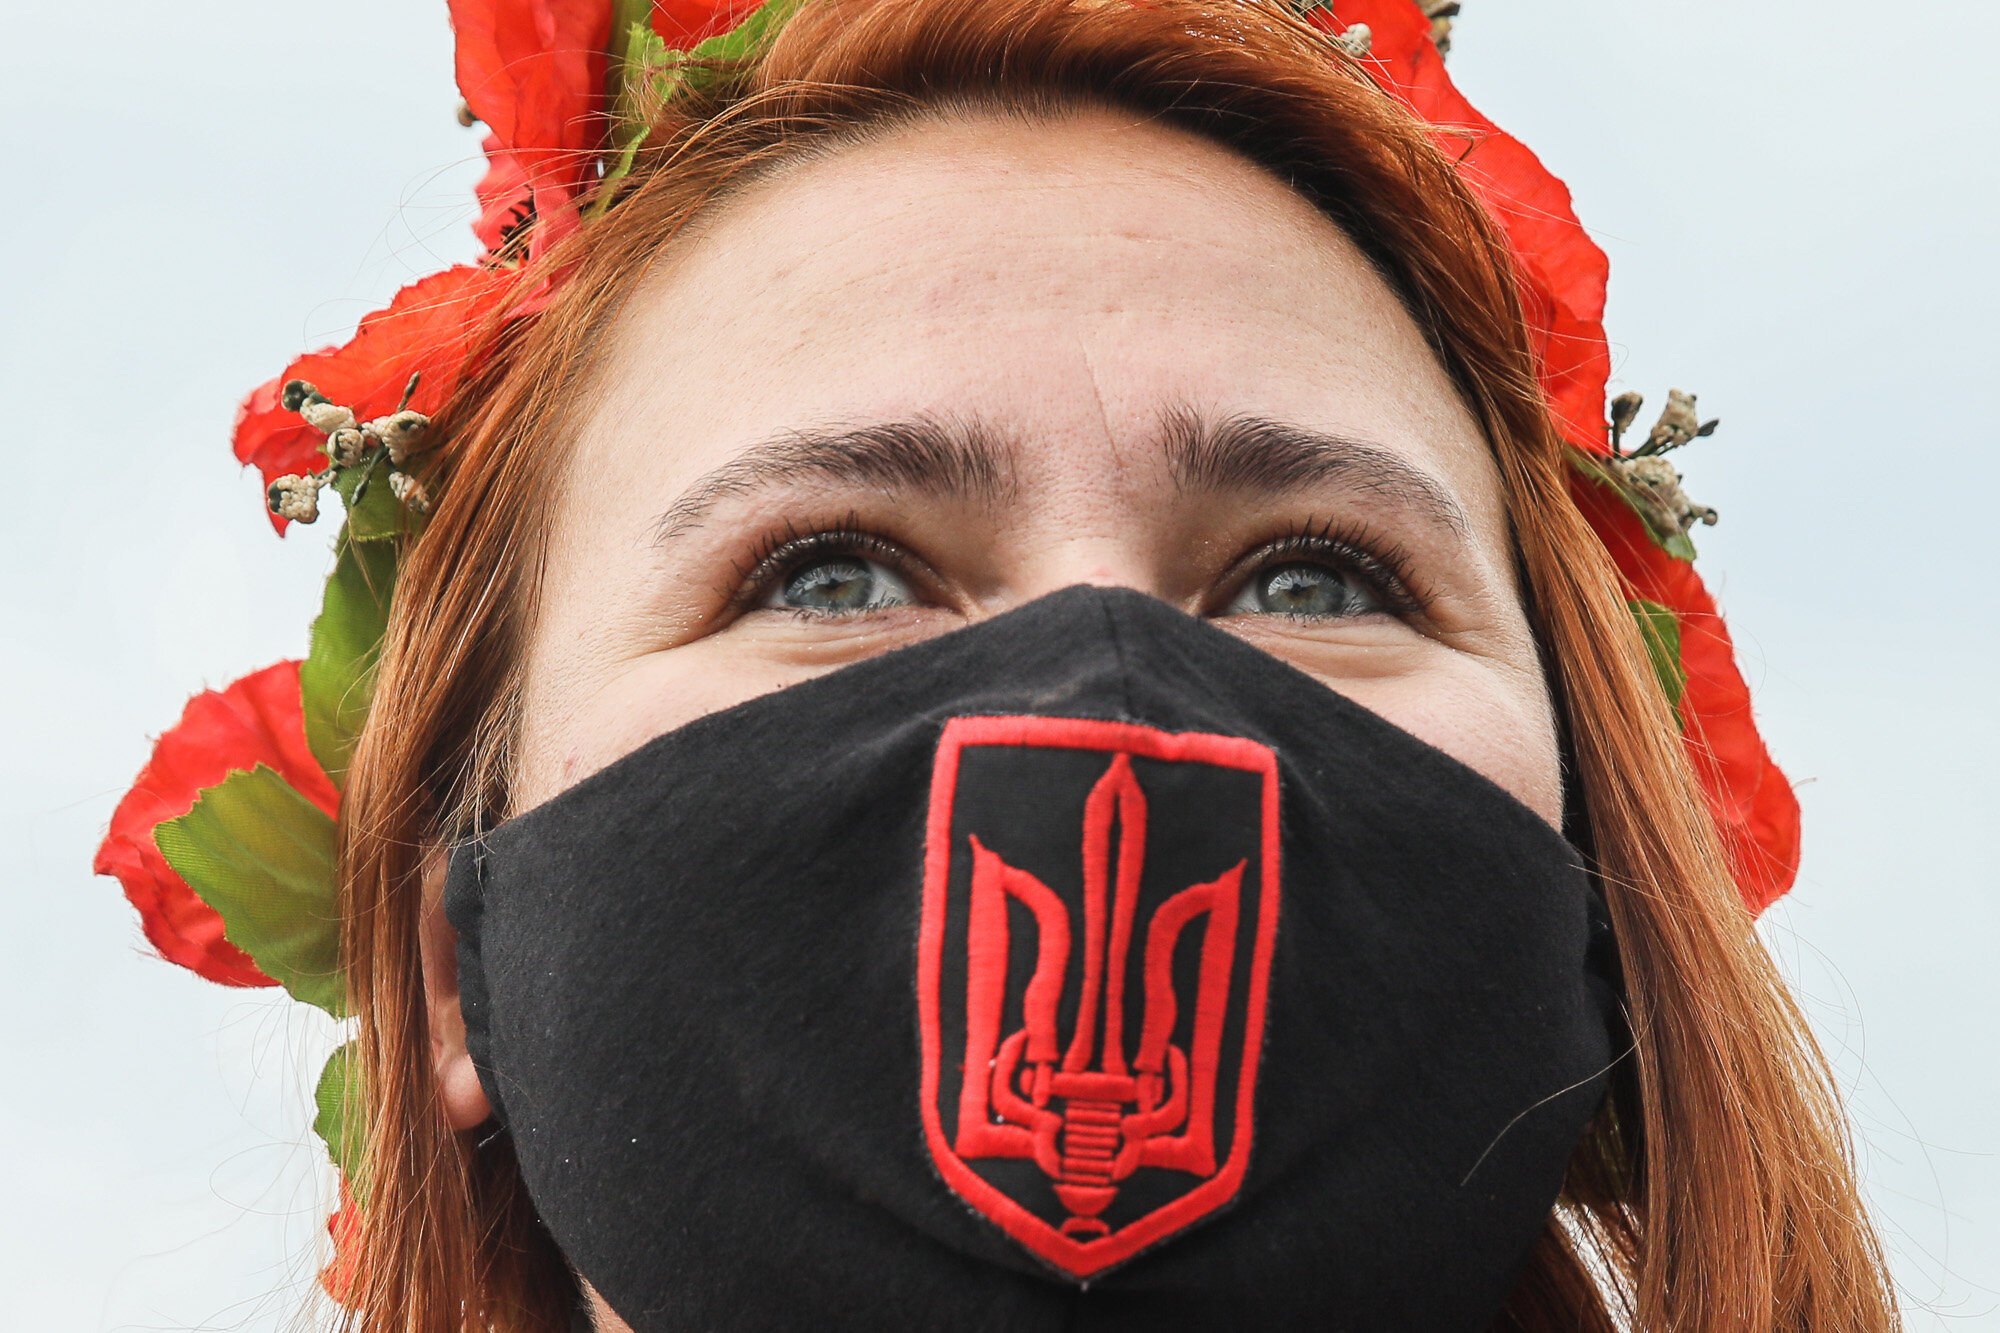 A woman watches the March of Defenders of Ukraine, an event where the participants marched from Shevchenko Park to Maidan Nezalezhnosti as part of Ukraine&#8217;s Independence Day celebrations in Kyiv on Aug. 24, 2020.